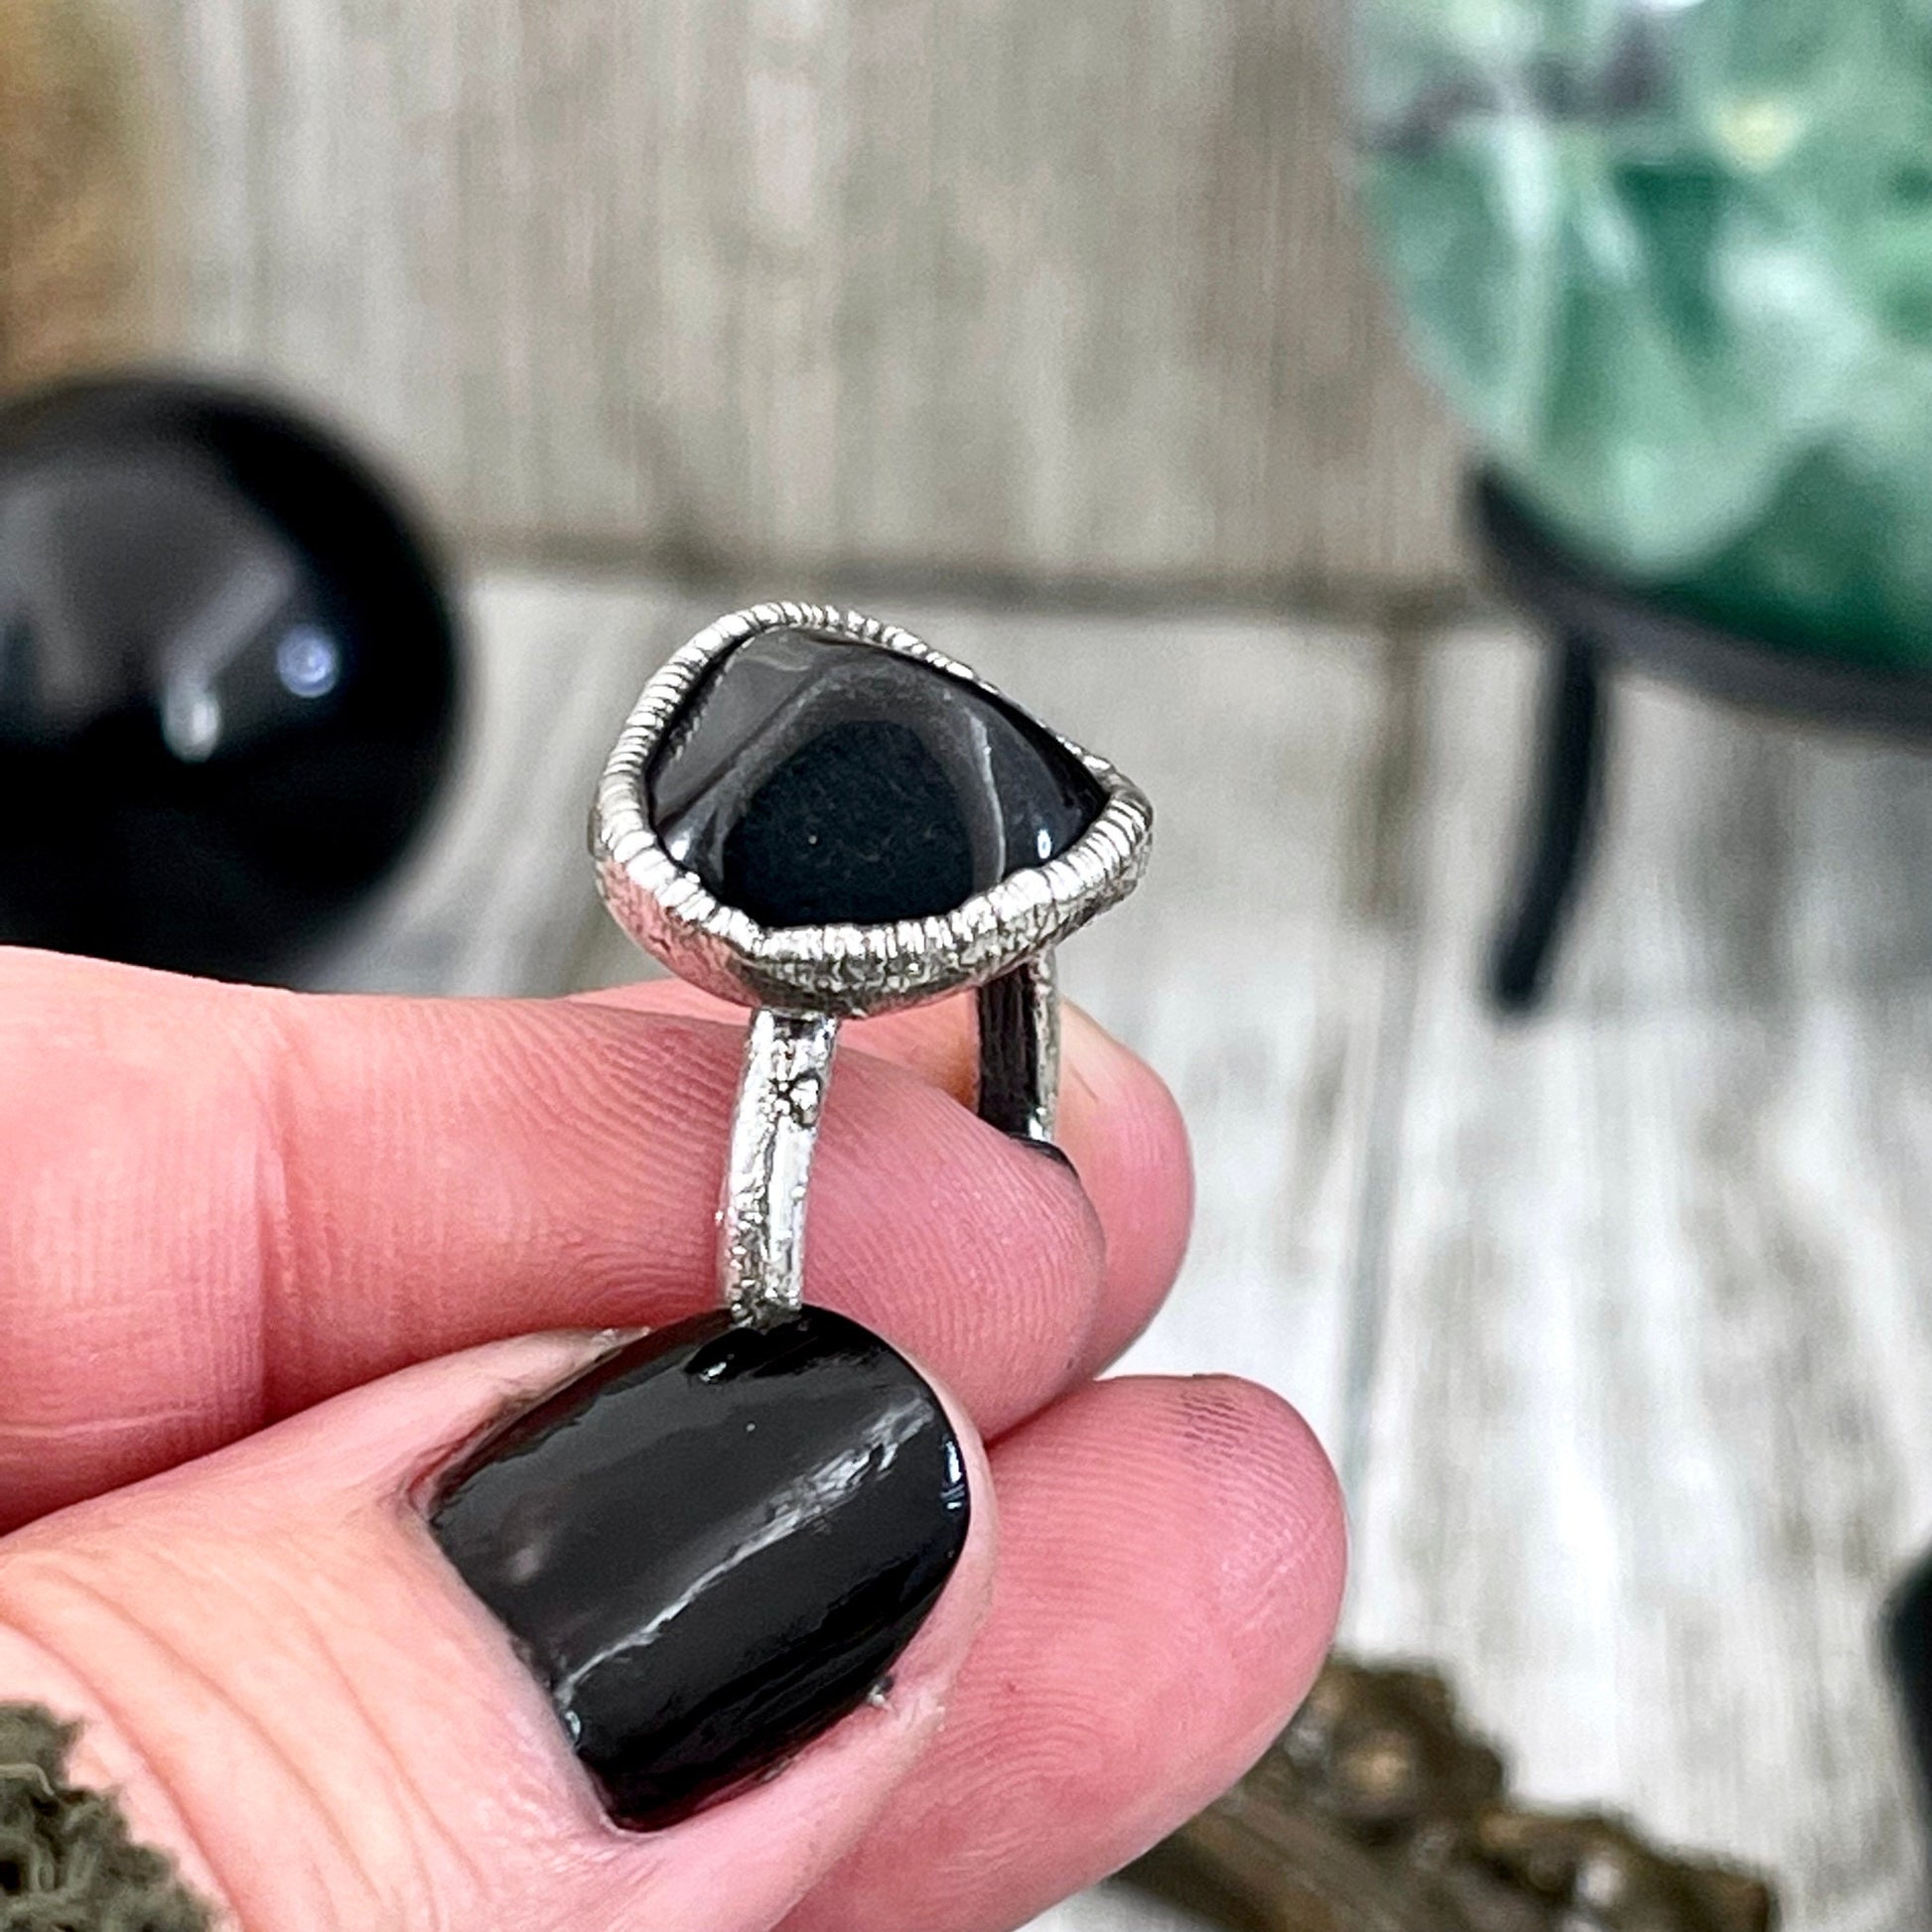 Natural Black Onyx Small Stone Ring in Fine Silver Size 5 6 7 8 9 10 / Foxlark Collection - Foxlark Crystal Jewelry